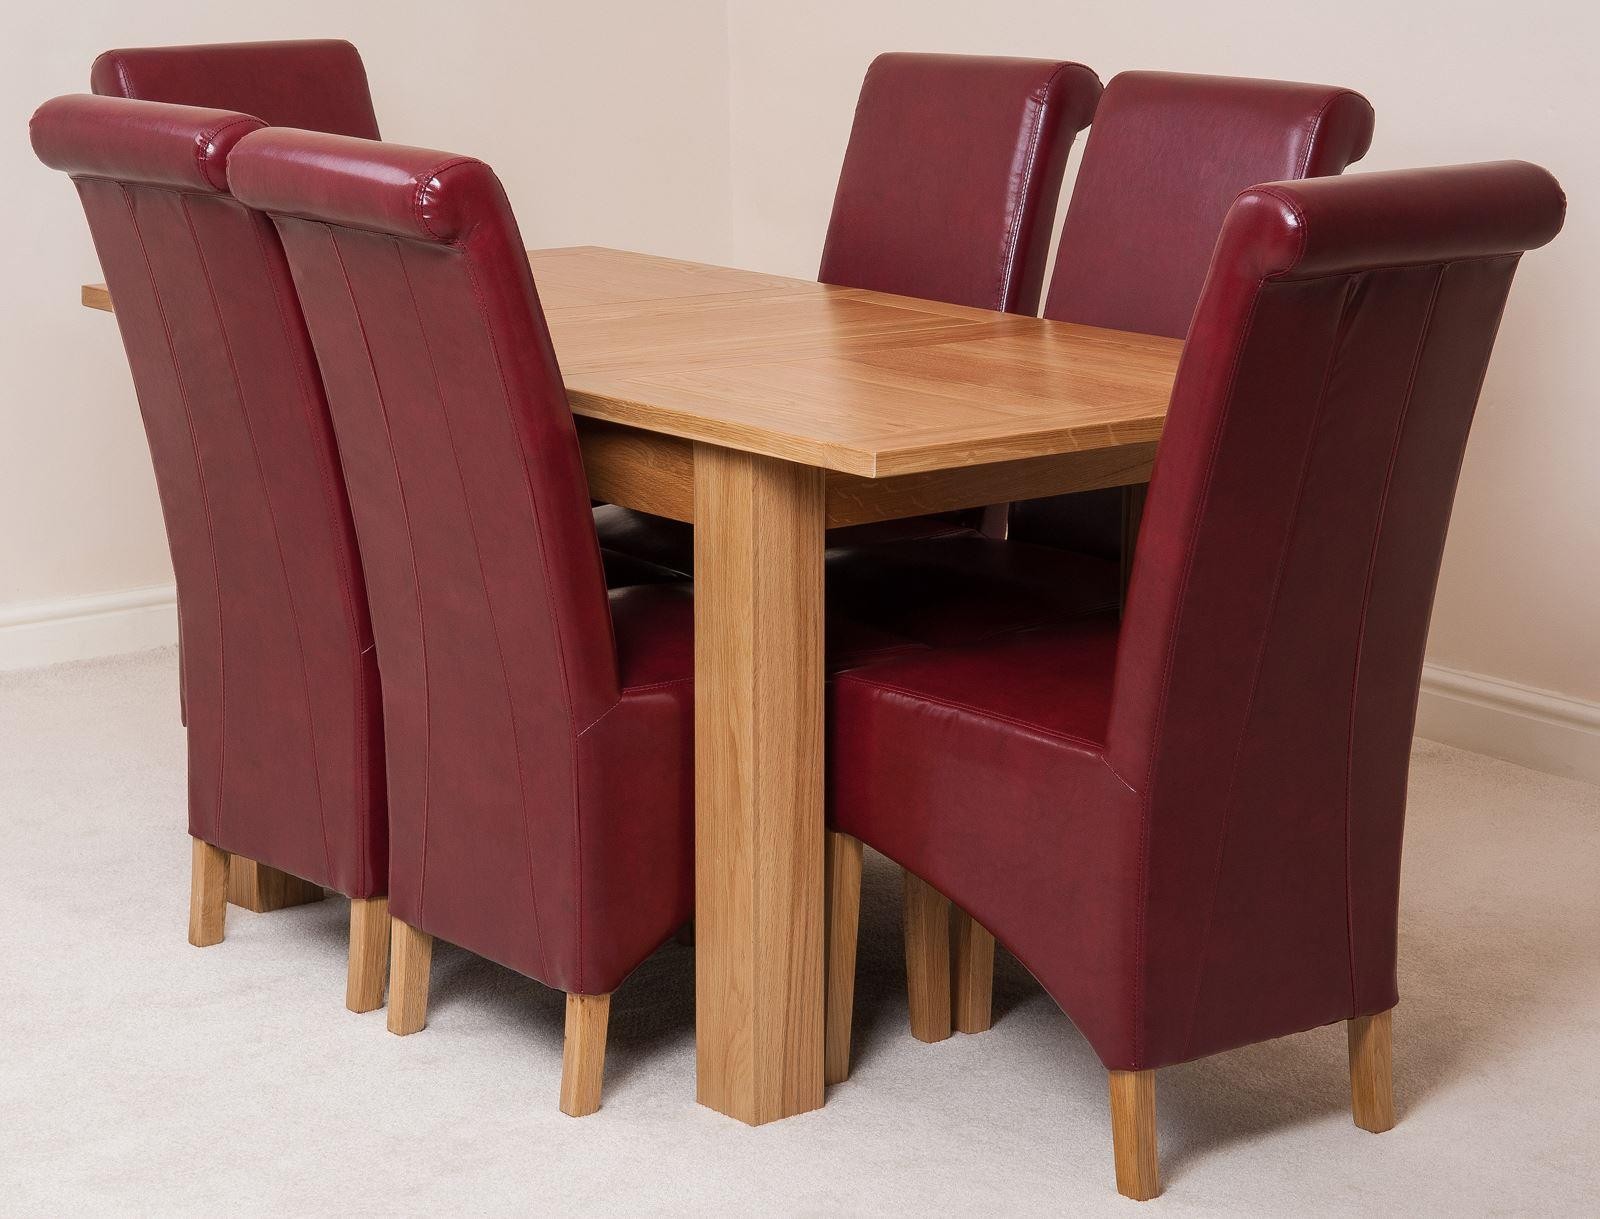 Hampton Solid Oak 120-160cm Extending Dining Table with 6 Montana Dining Chairs [Burgundy Leather]